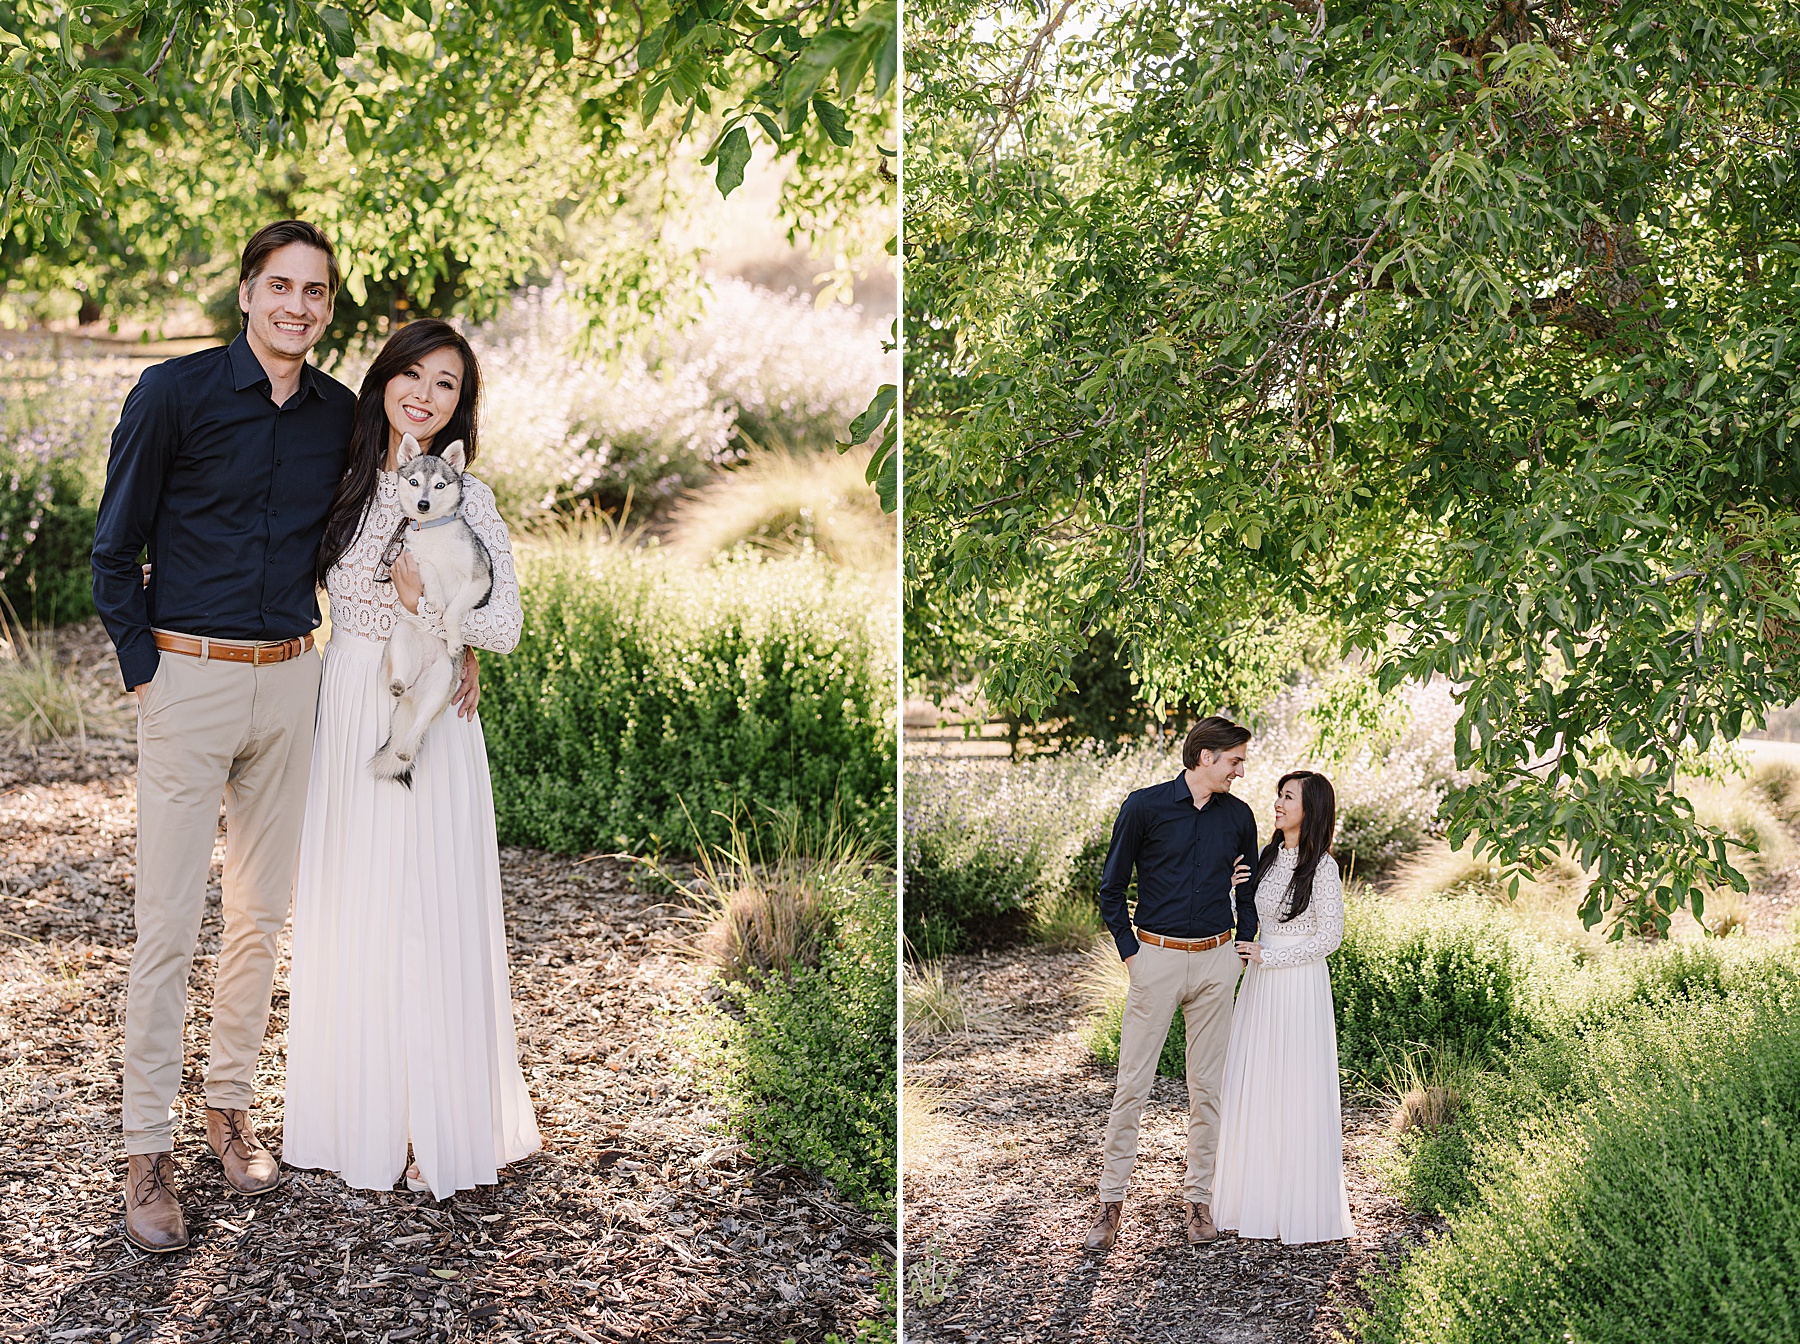 Nikkles Photographer, SLO Wedding Photographer, shares inspiration for a Law Estate Winery Engagement Session in Paso Robles, California